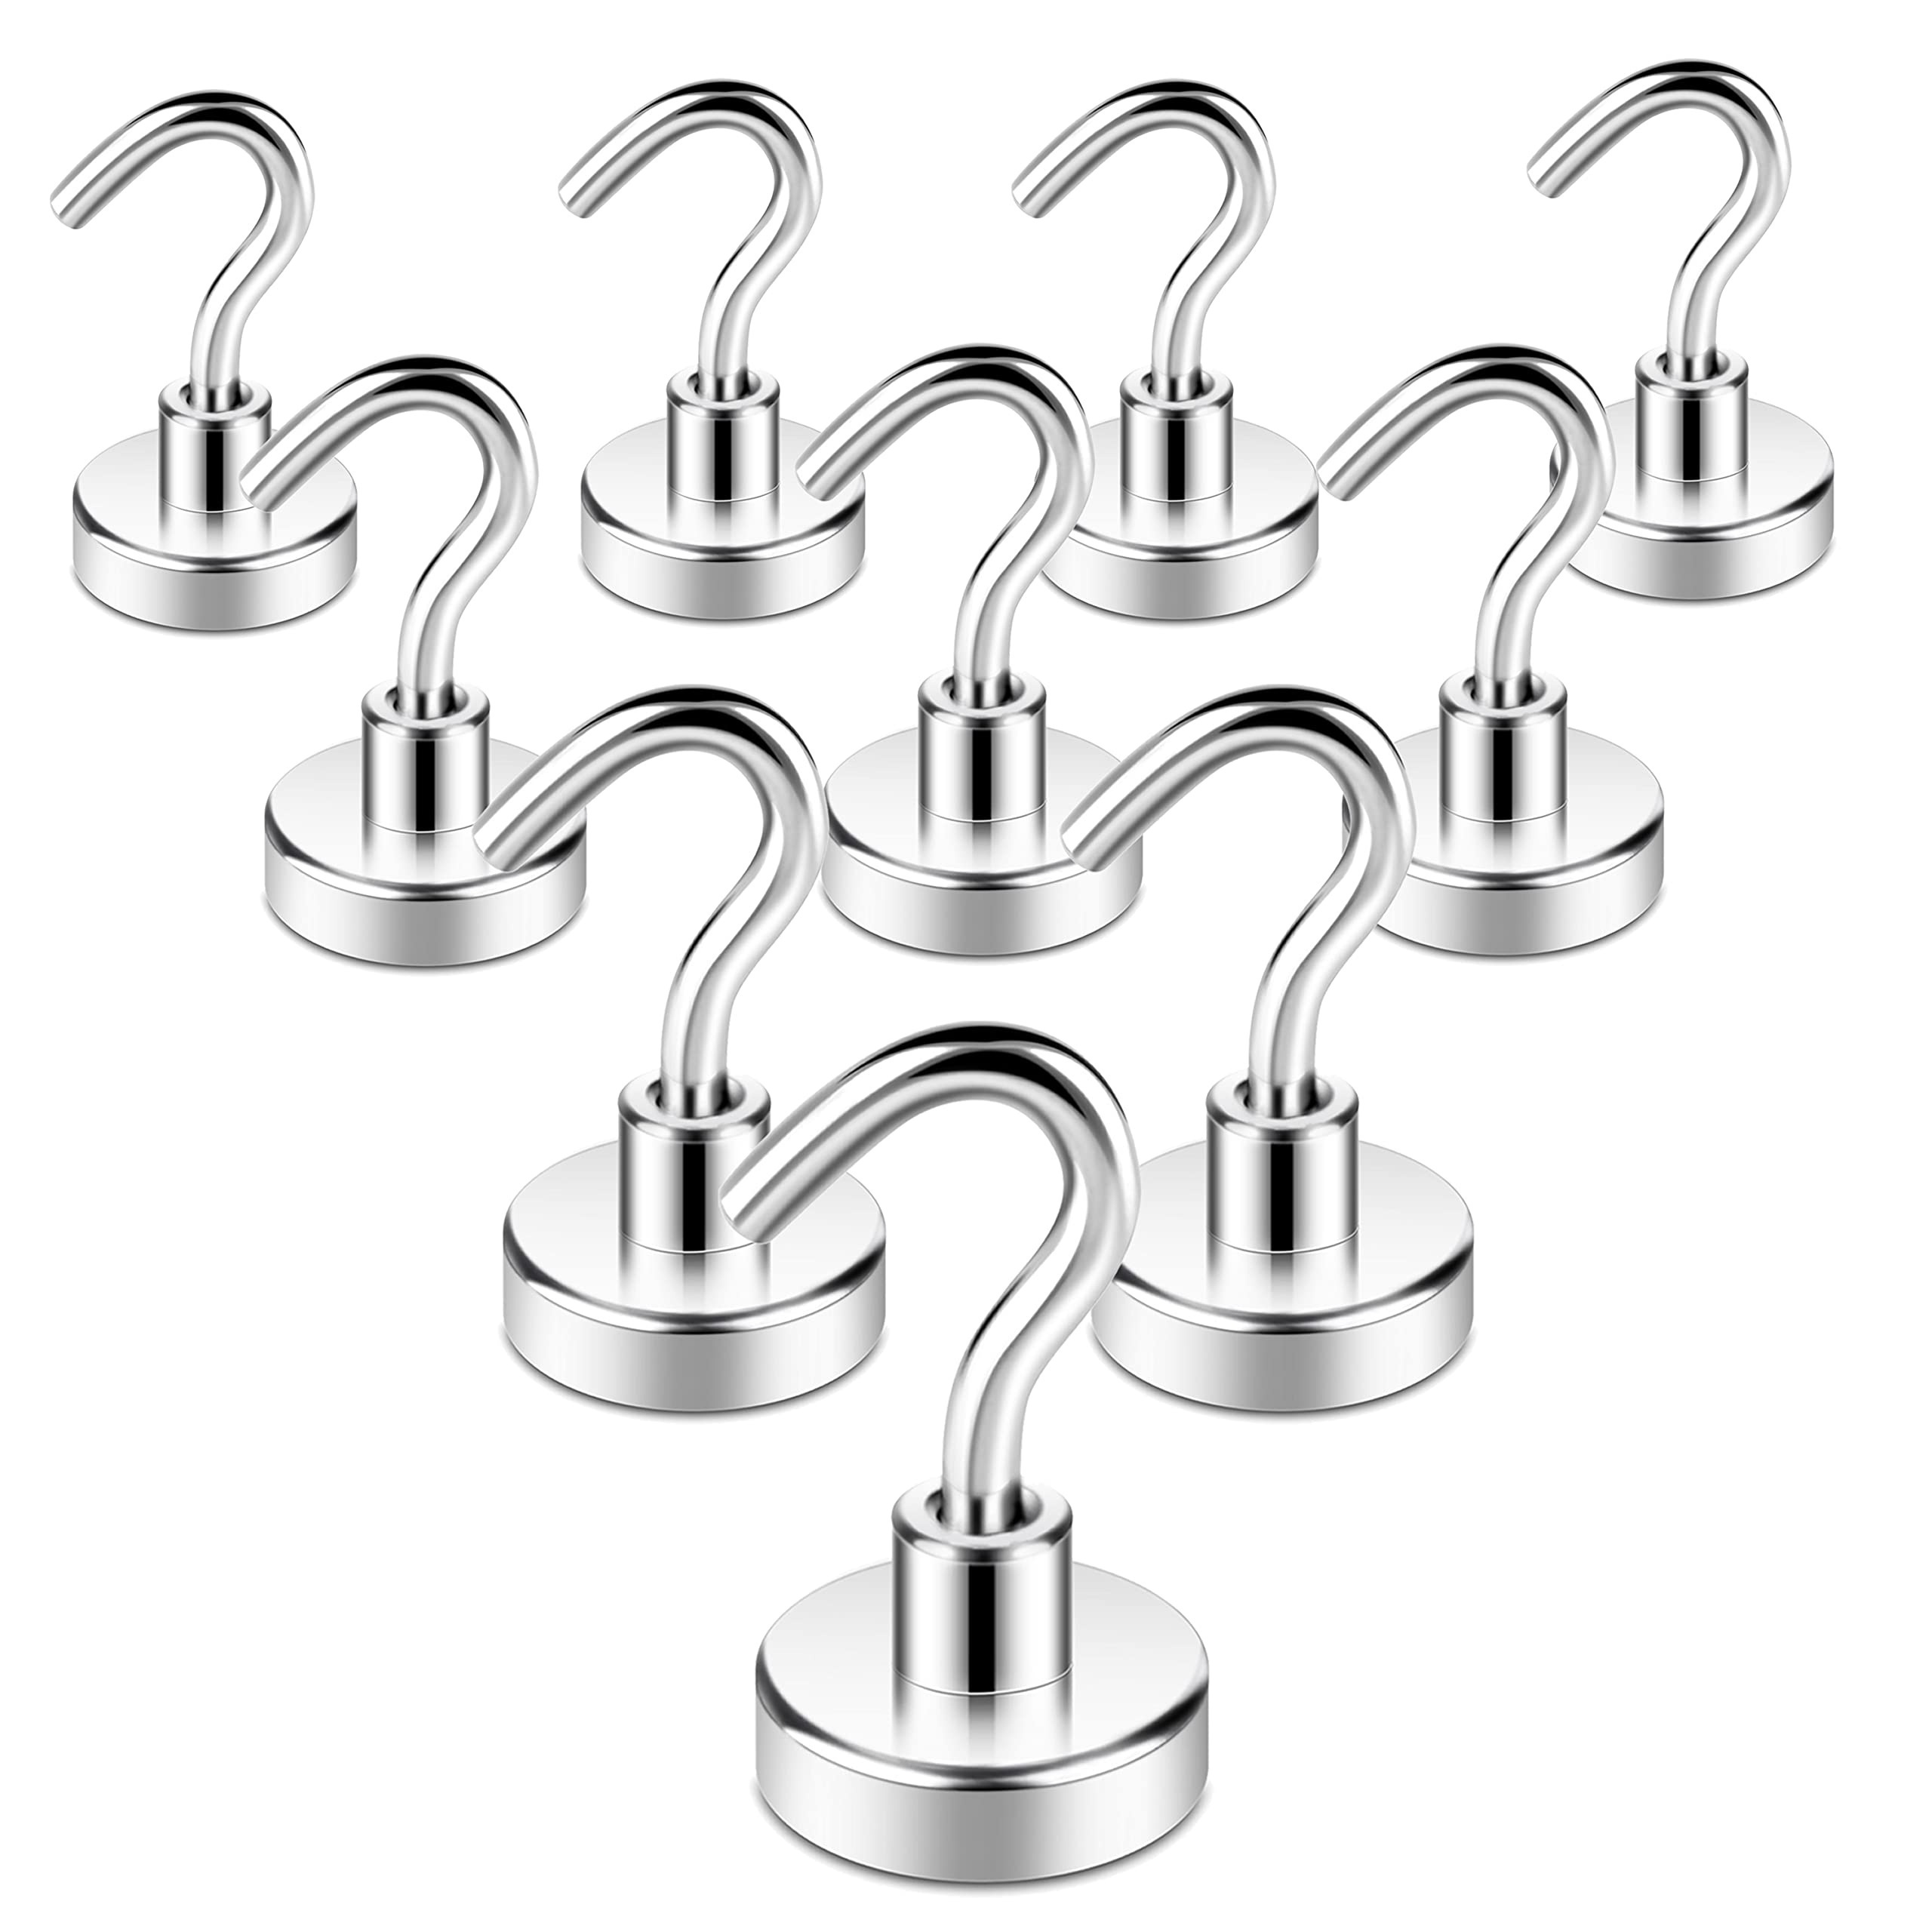 

10pcs Super Strong Magnetic Hooks, 25lbs Heavy Duty Magnetic Hooks For Hanging, Magnet Hooks For Cruise Ship, Camping Grill, Kitchen, Fridge, Garage Wall